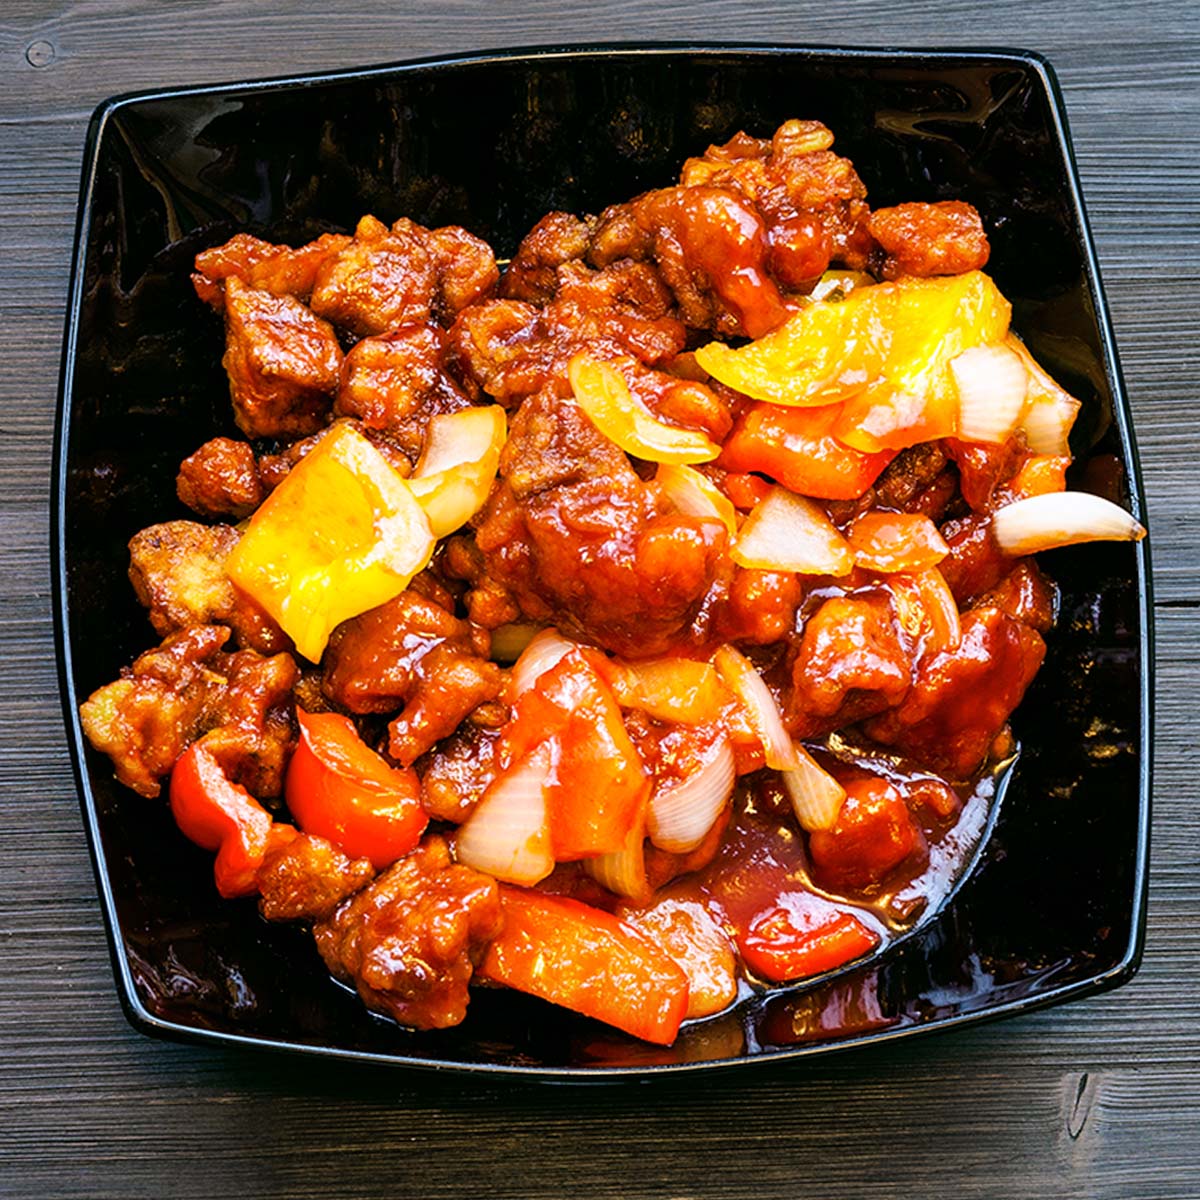 The best Chinese sweet-and-sour chicken. This oven-baked version is less calorific than stir-fry variants made with off-the-shelf bottled sweet-and-sour sauces.